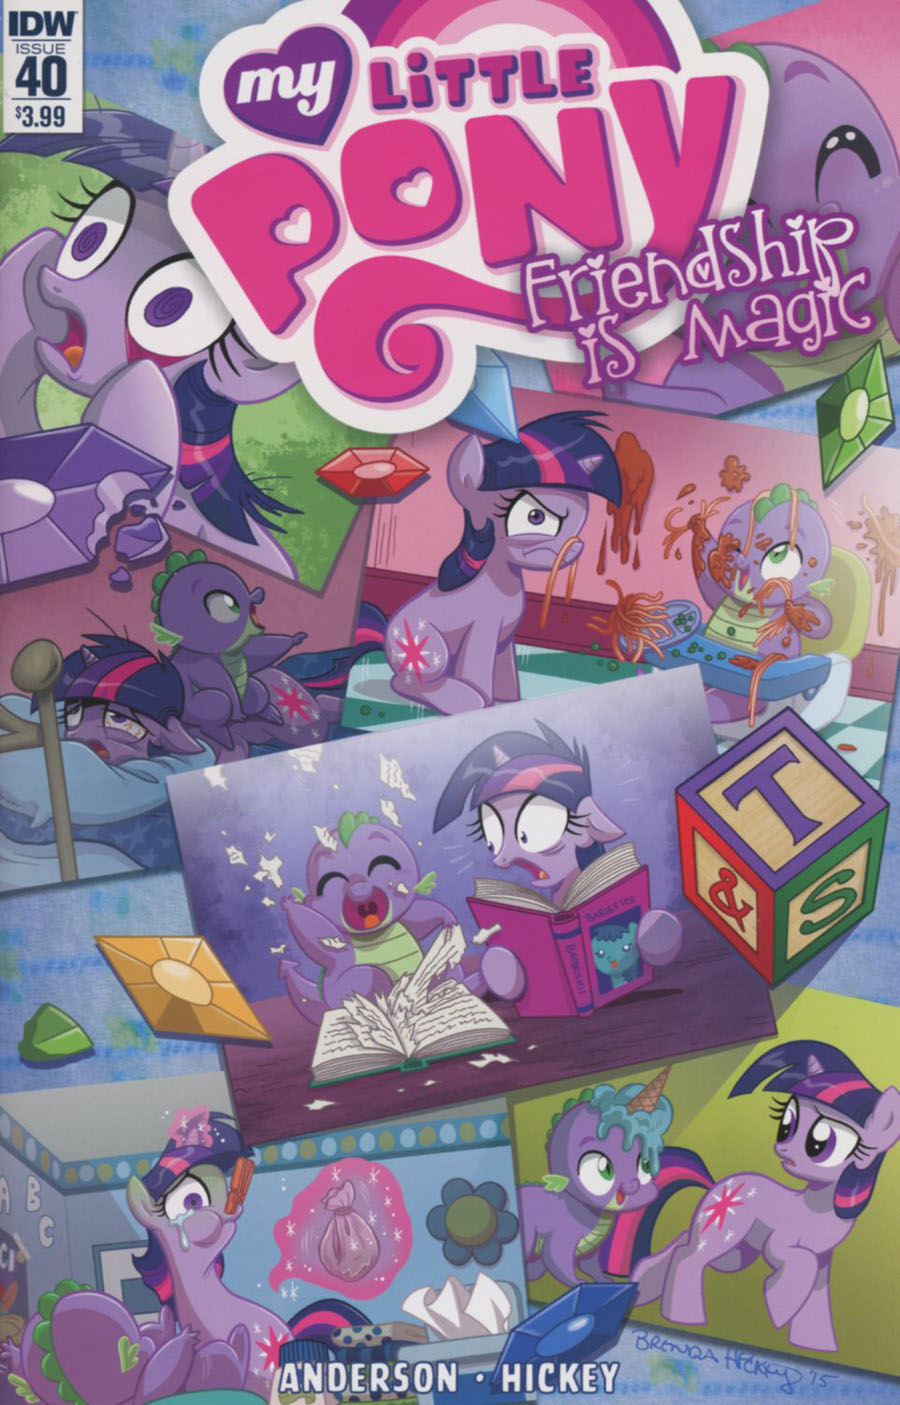 My Little Pony Friendship Is Magic #40 Cover A Regular Brenda Hickey Cover